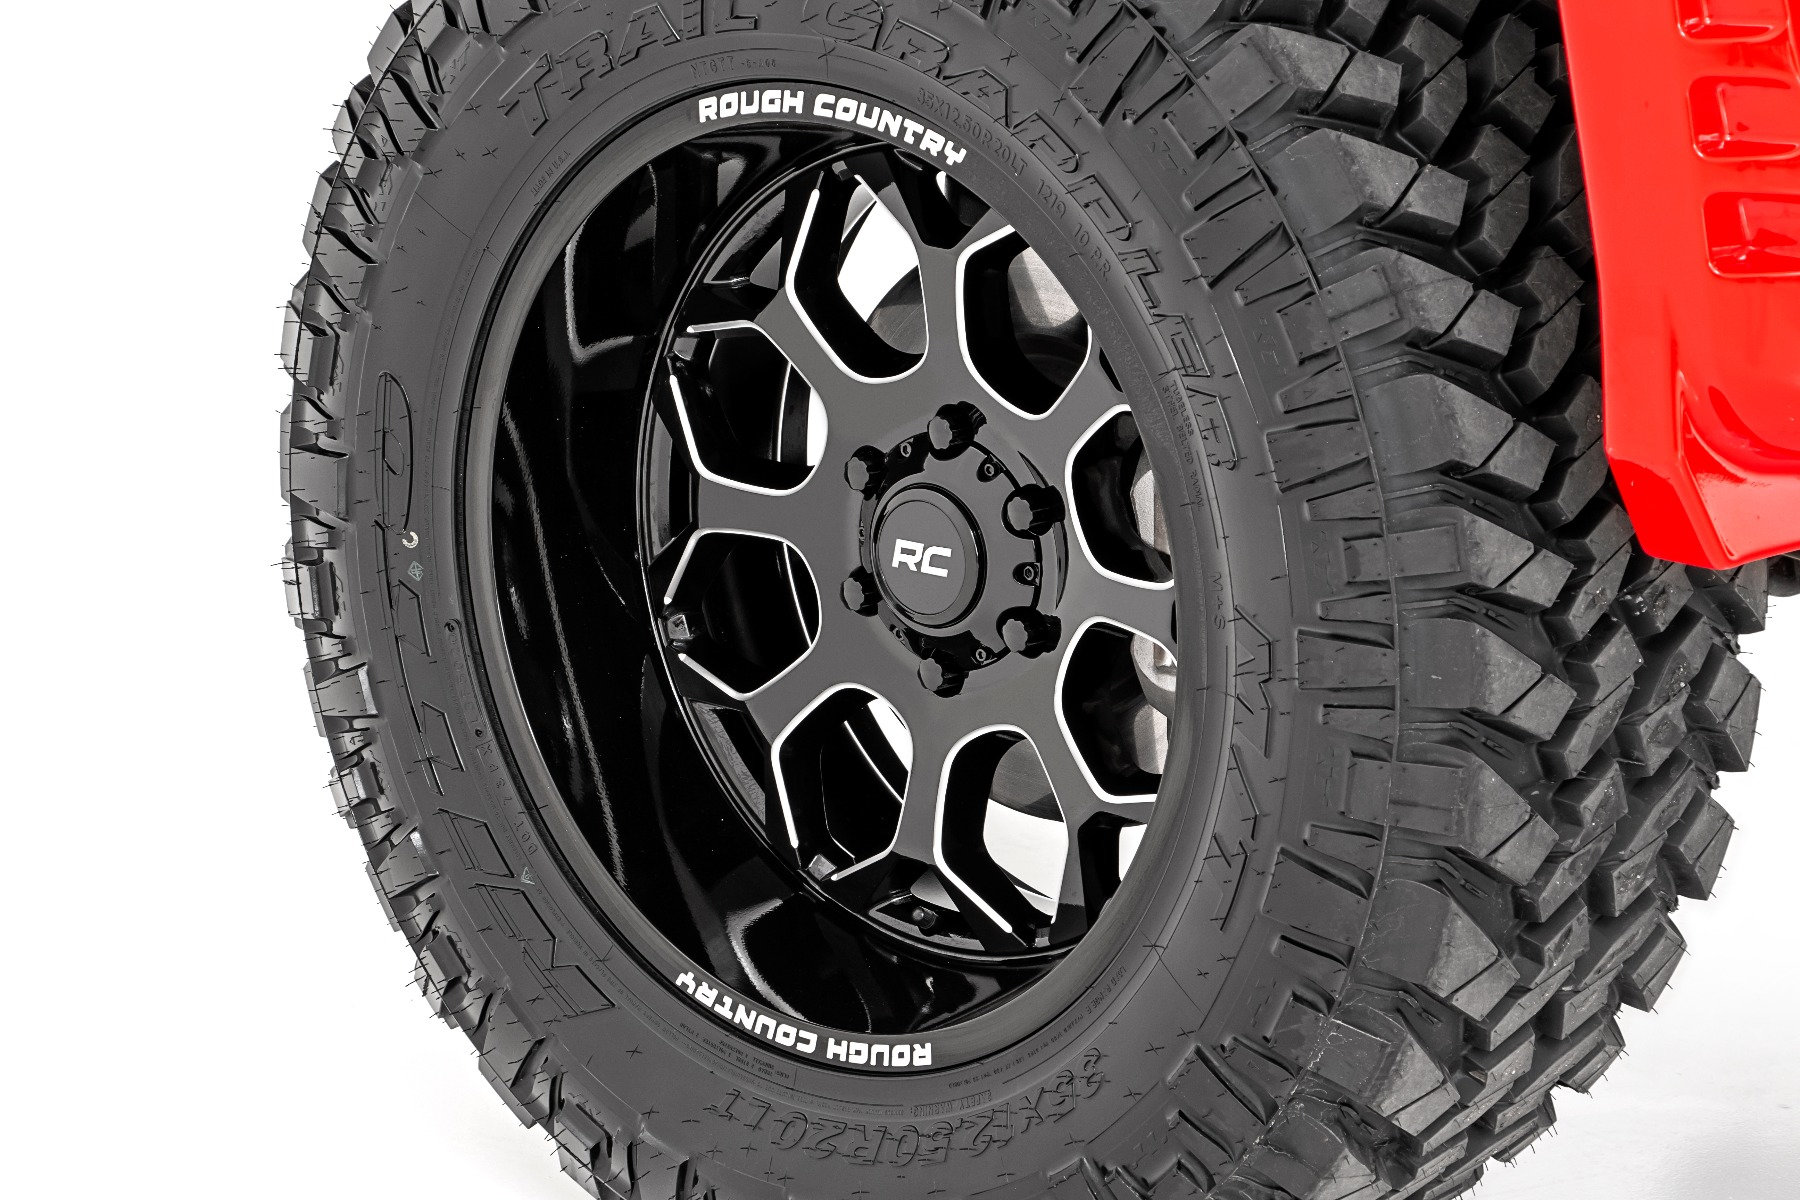 Rough Country 96201013 Series 96 Wheel 20x10 with  Backspace in Black  with Milled Accents for 87-06 Jeep Wrangler YJ & TJ | Quadratec